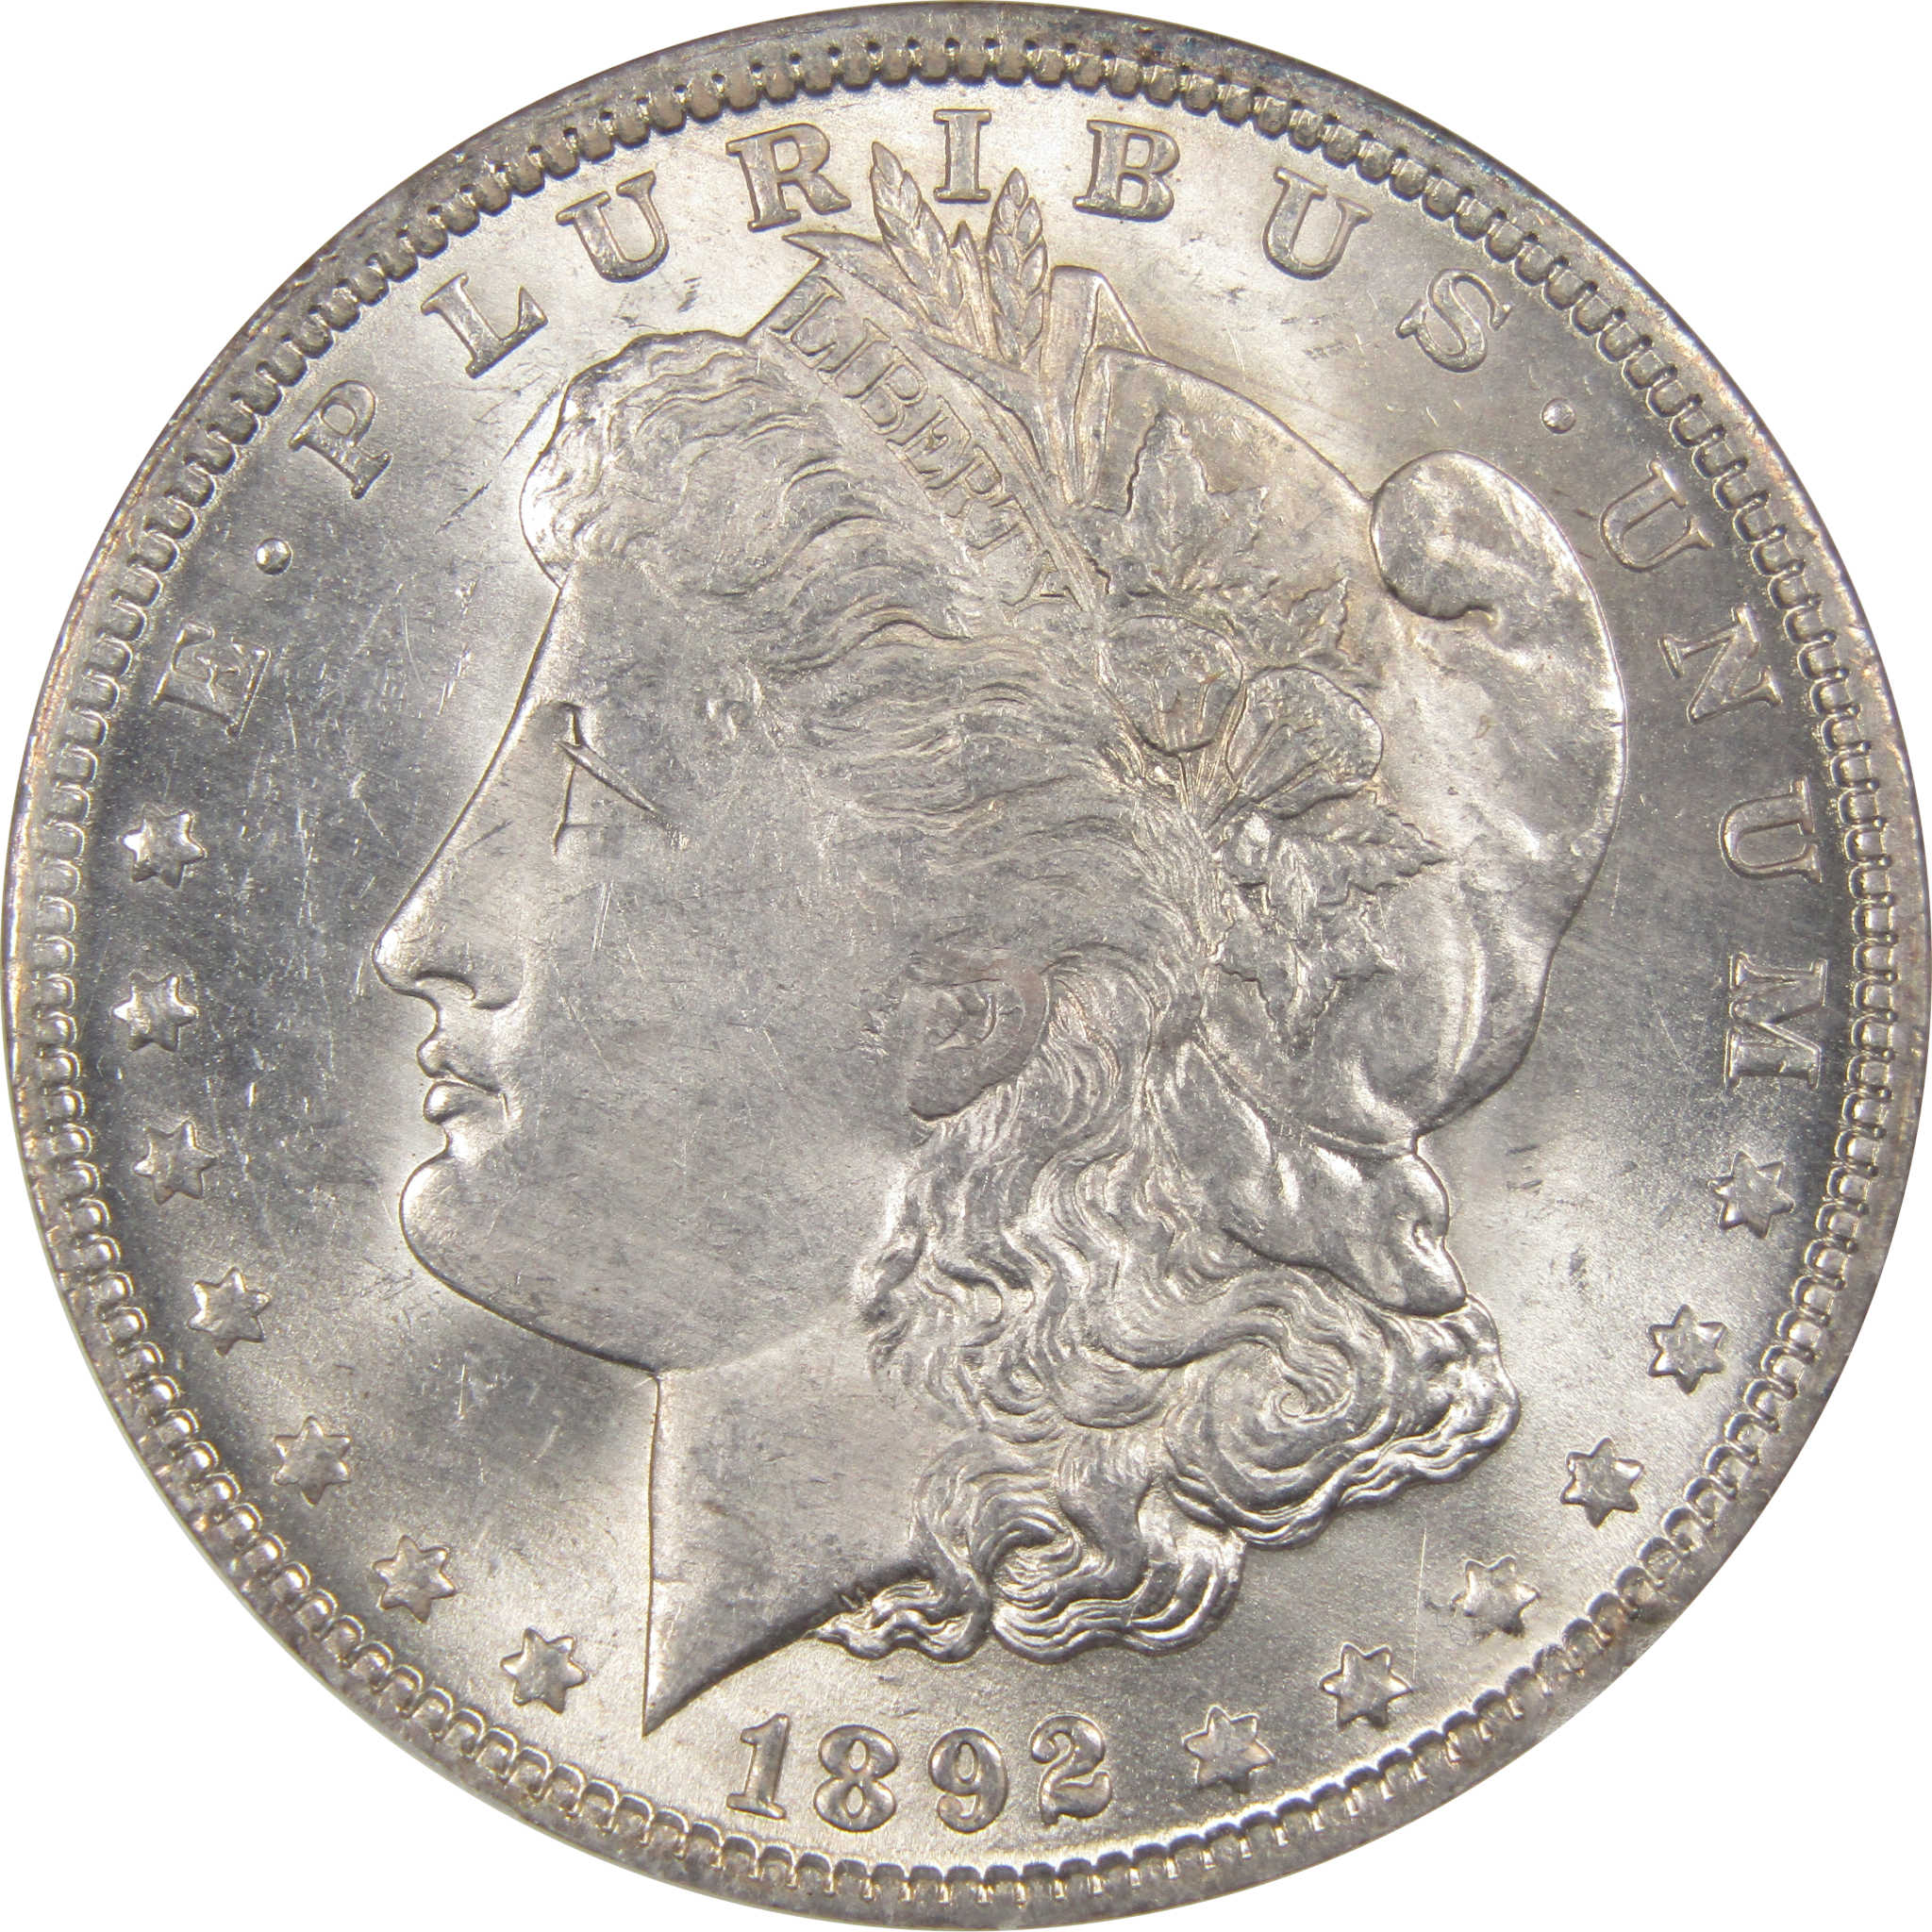 1892 O Morgan Dollar MS 61 NGC CAC 90% Silver $1 Uncirculated SKU:I439 - Morgan coin - Morgan silver dollar - Morgan silver dollar for sale - Profile Coins &amp; Collectibles